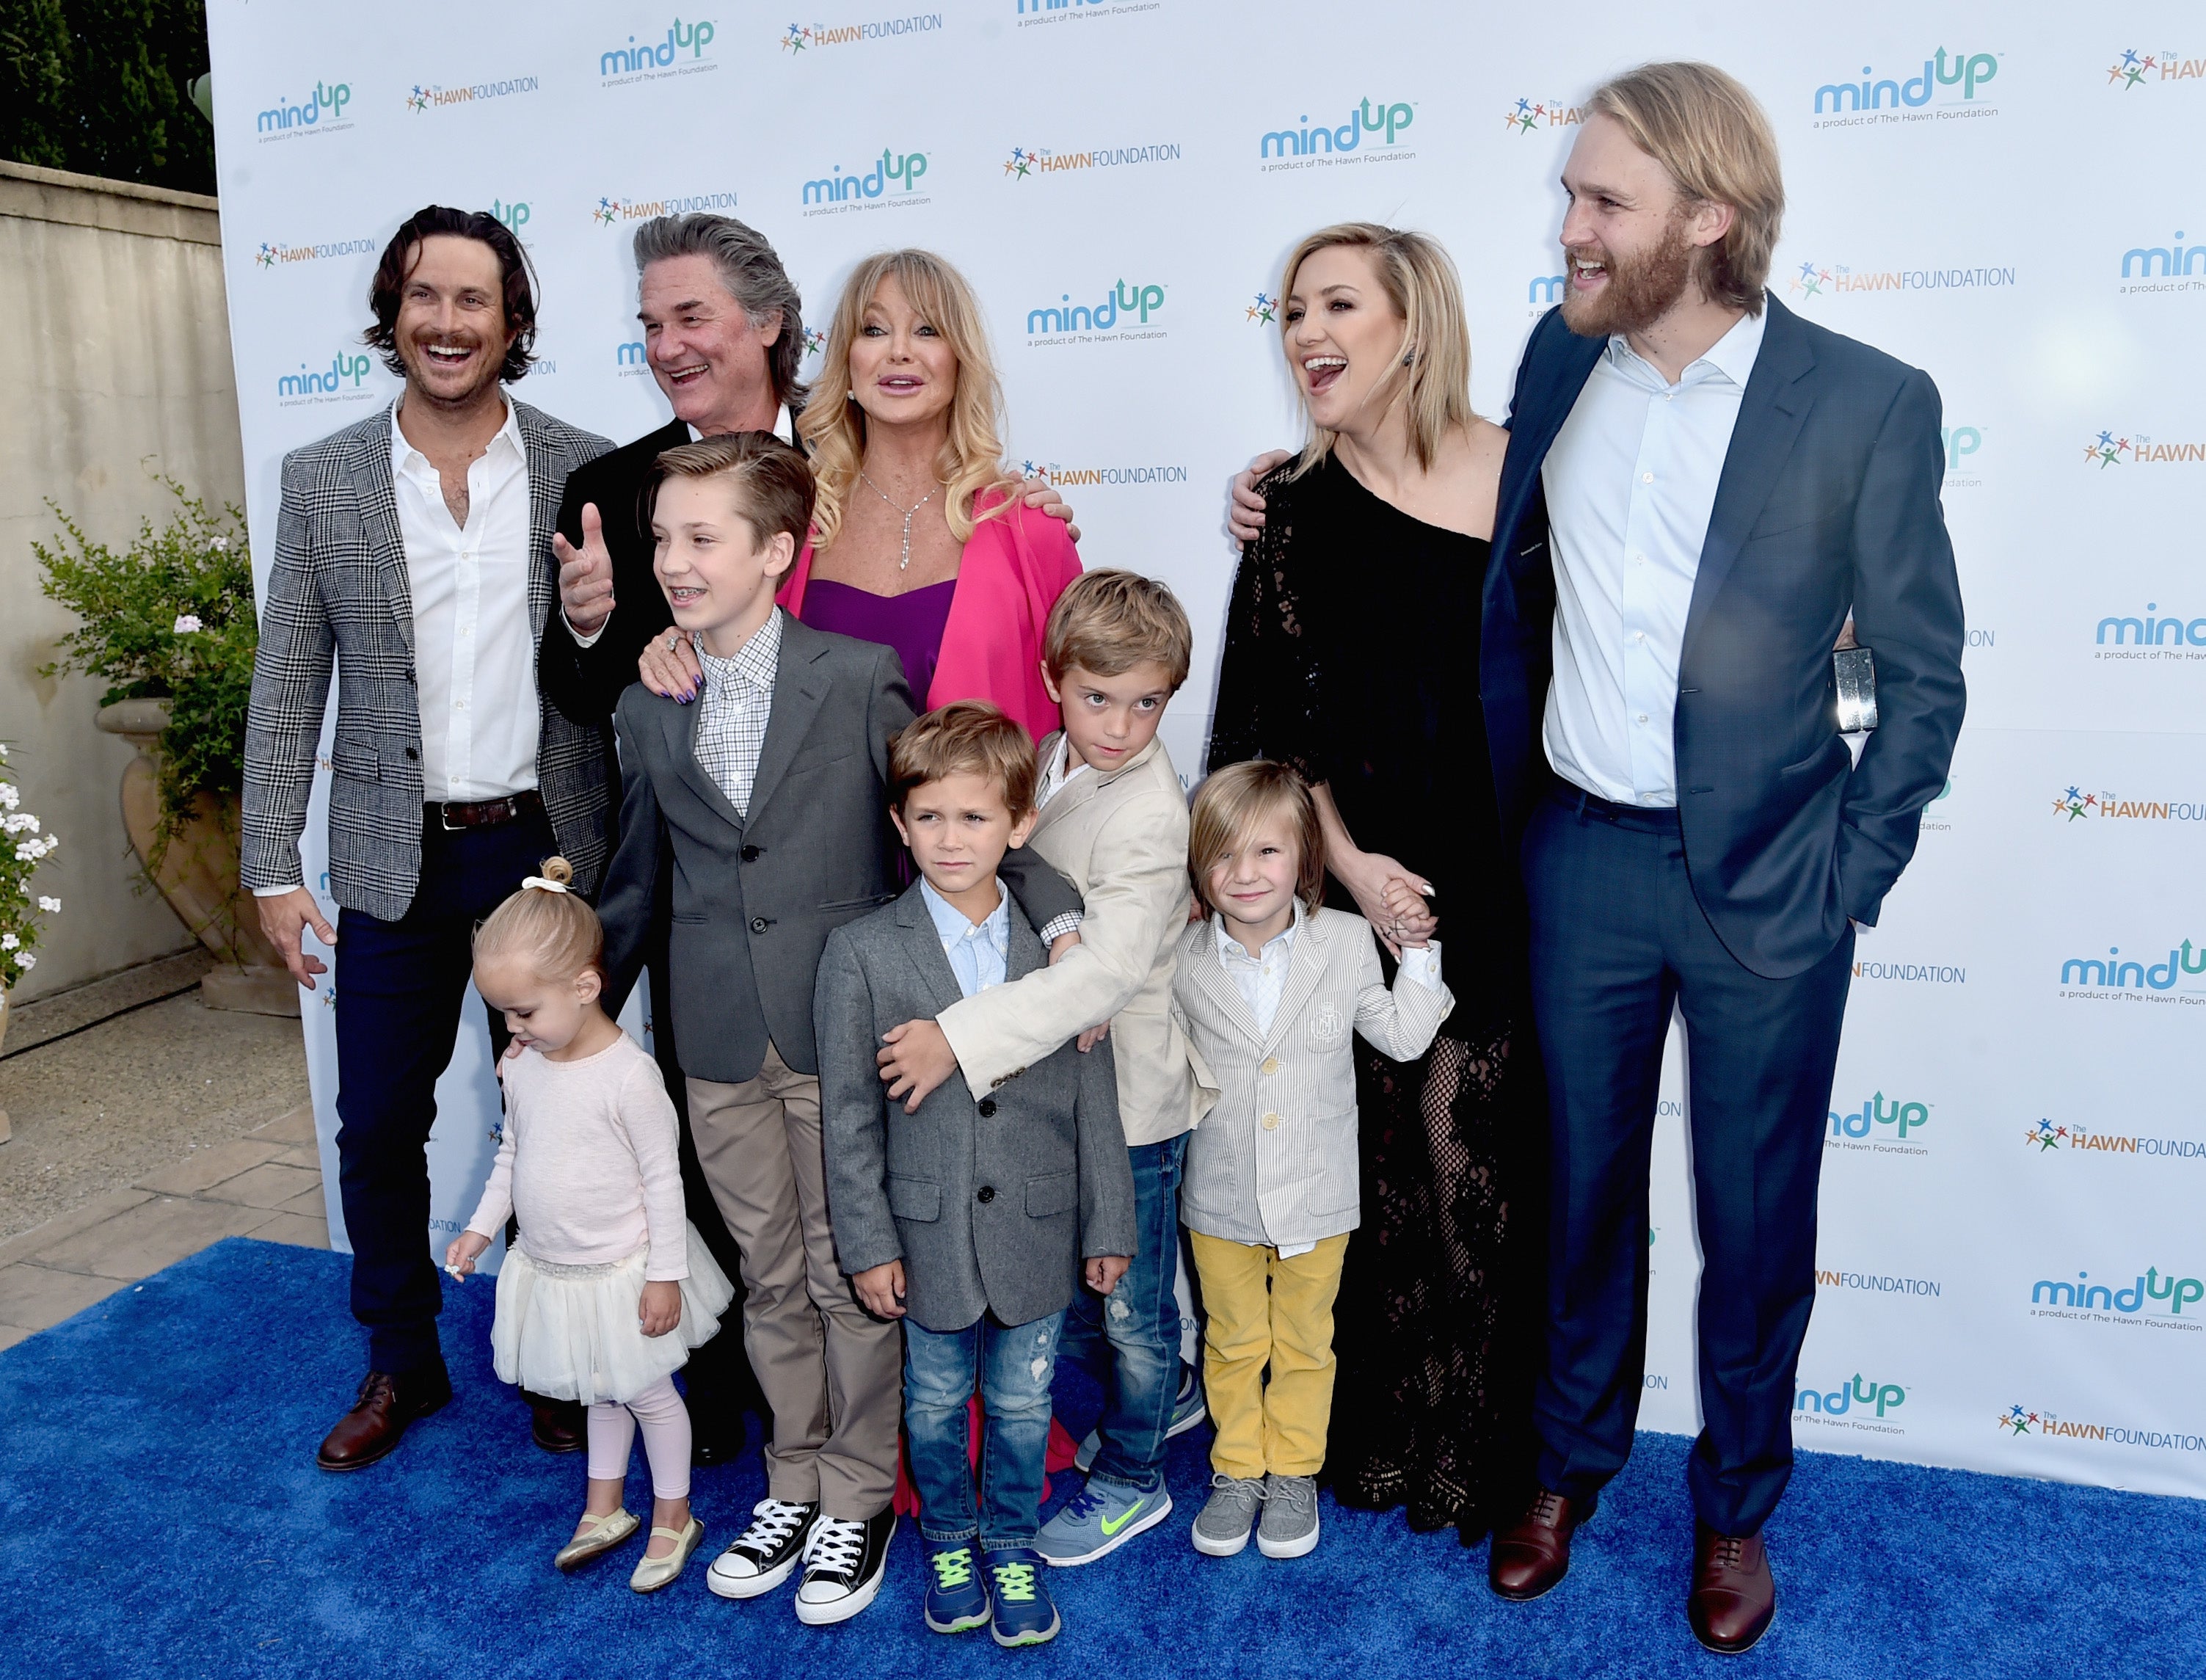 goldie hawn, kurt russell, kate hudson, oliver hudson, kelly ripa, goldie hawn thinks it would be ‘so fun’ to make a movie with her famous family